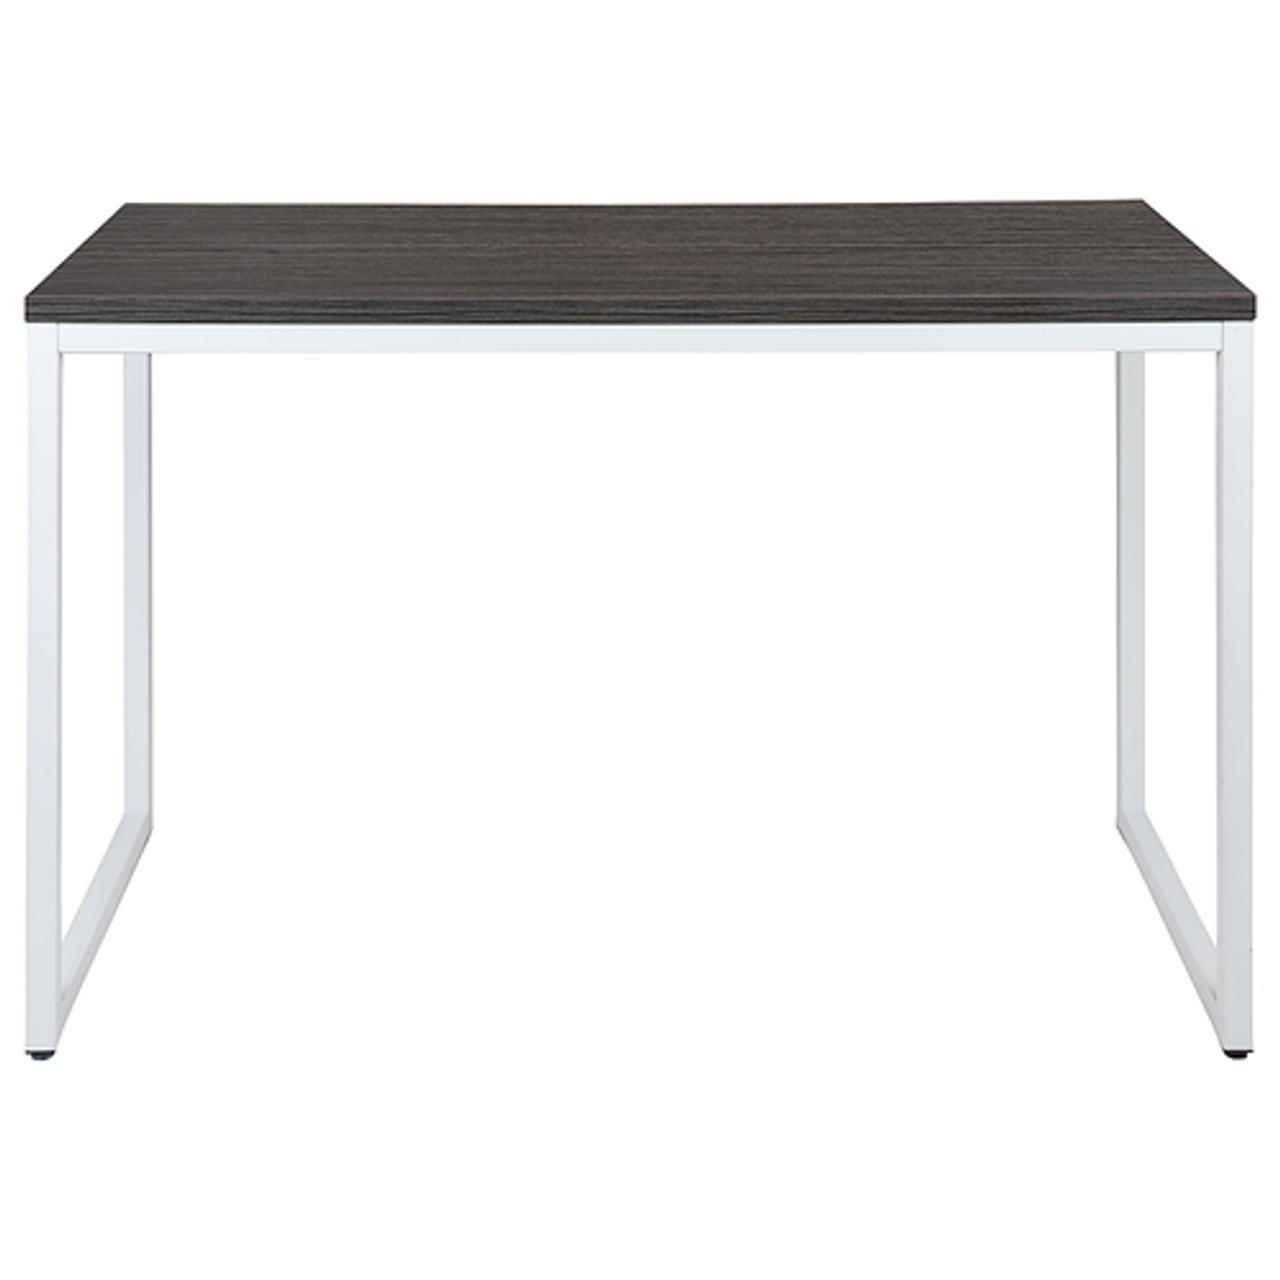 Flash Furniture - Industrial Modern Desk-47"L Commercial Grade Home Office Desk-Rustic Gray/White - Rustic Gray Top/White Frame